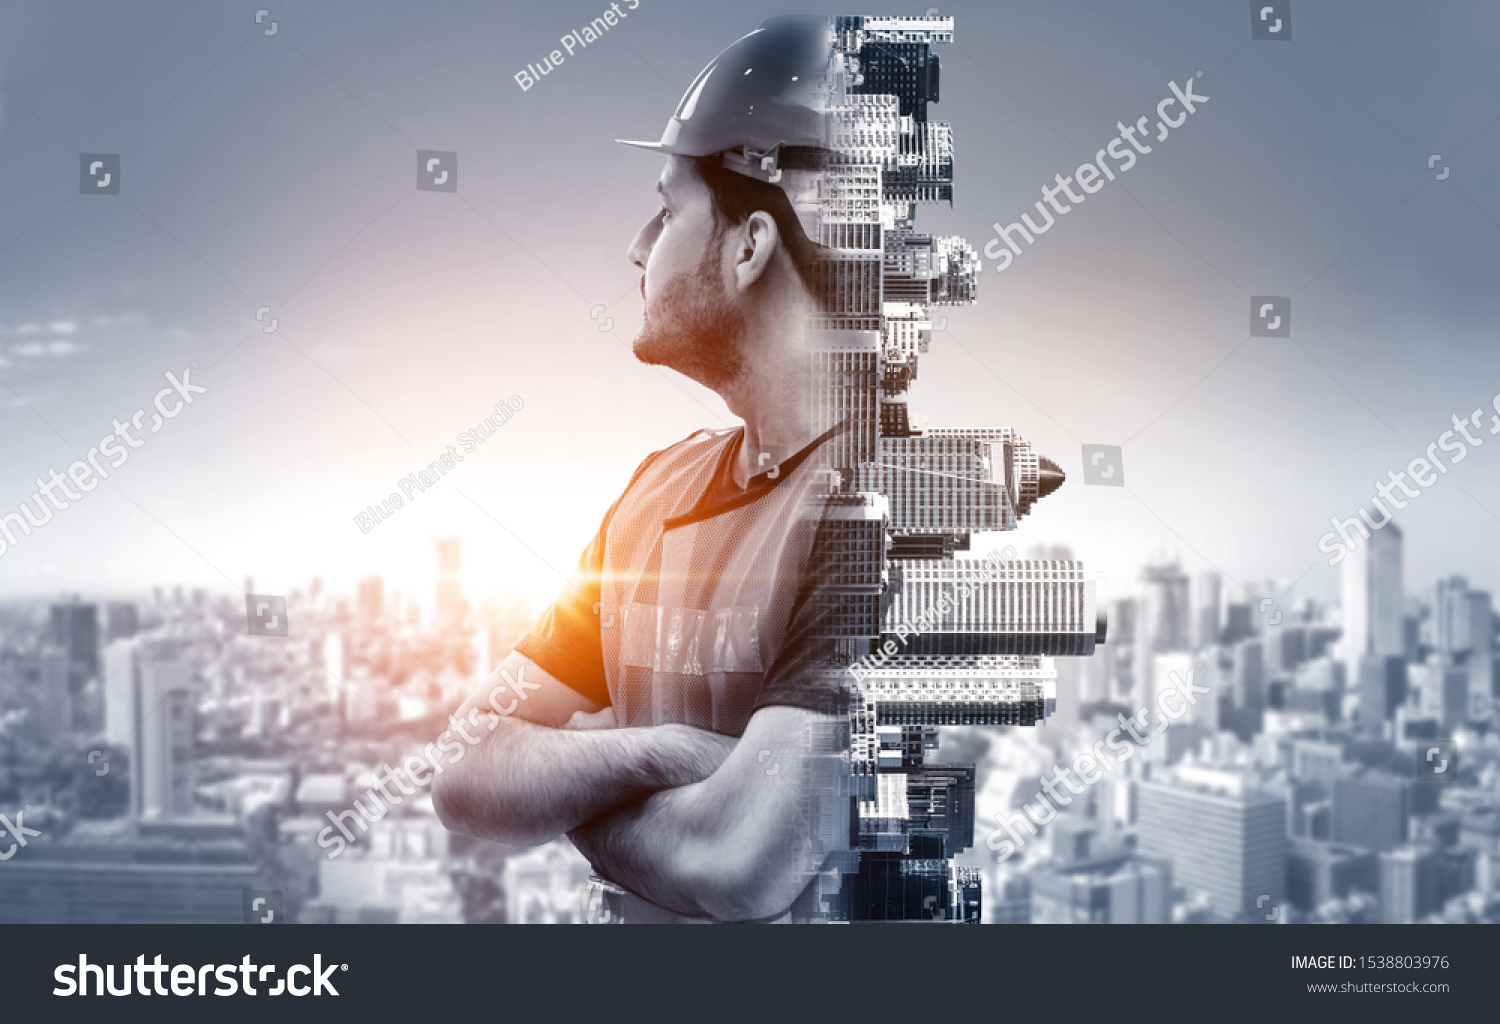 Future building construction engineering project concept with double exposure graphic design. Building engineer, architect people or construction worker working with modern civil equipment technology. #1538803976